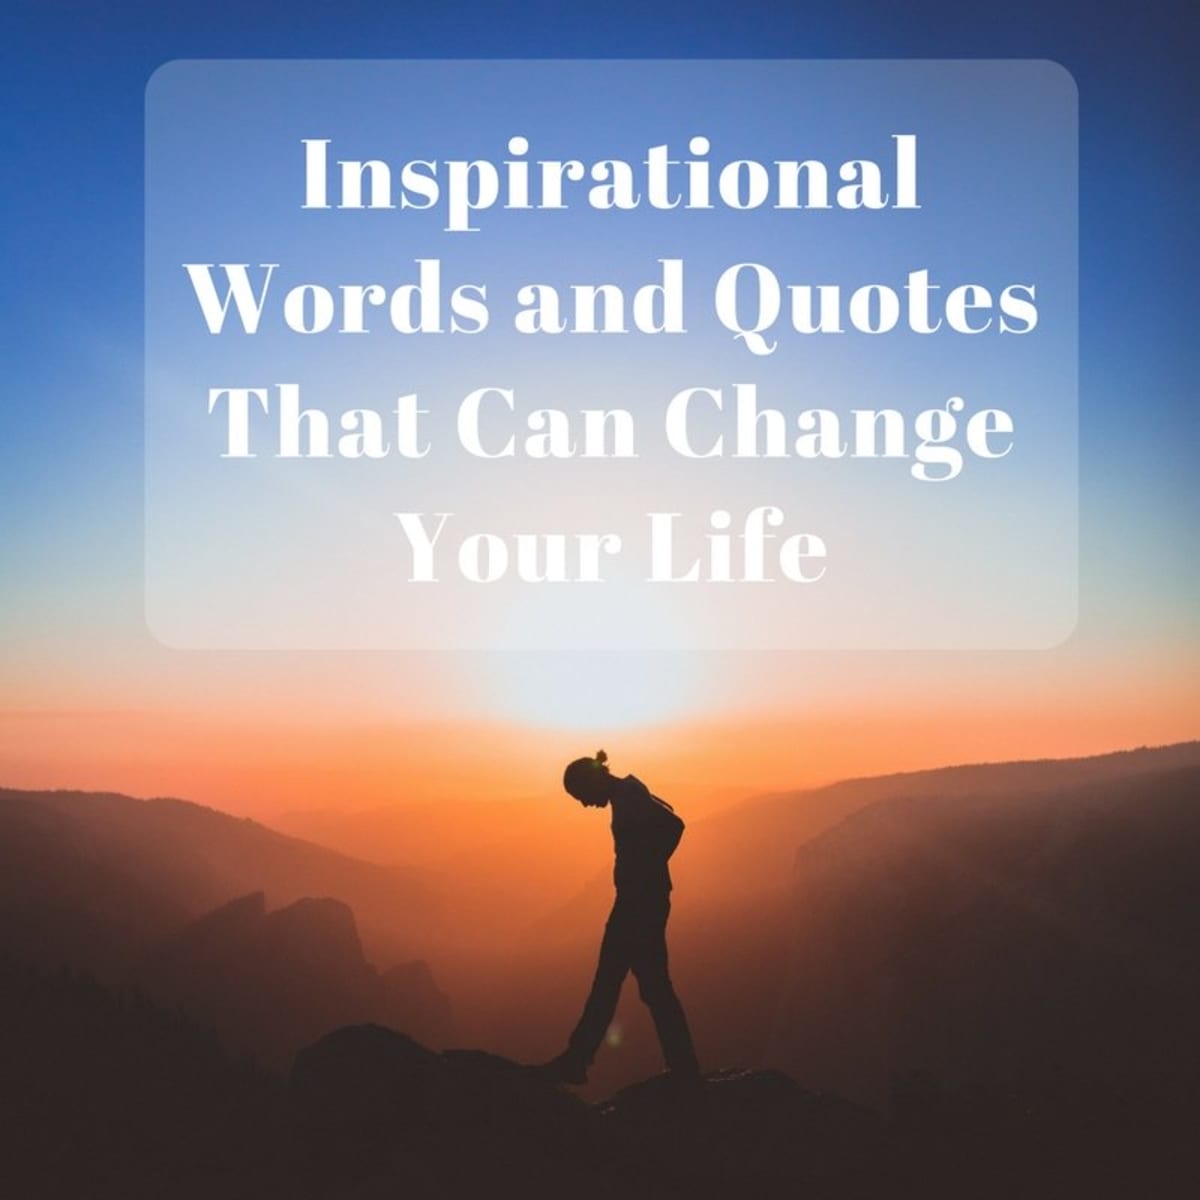 inspiration word images